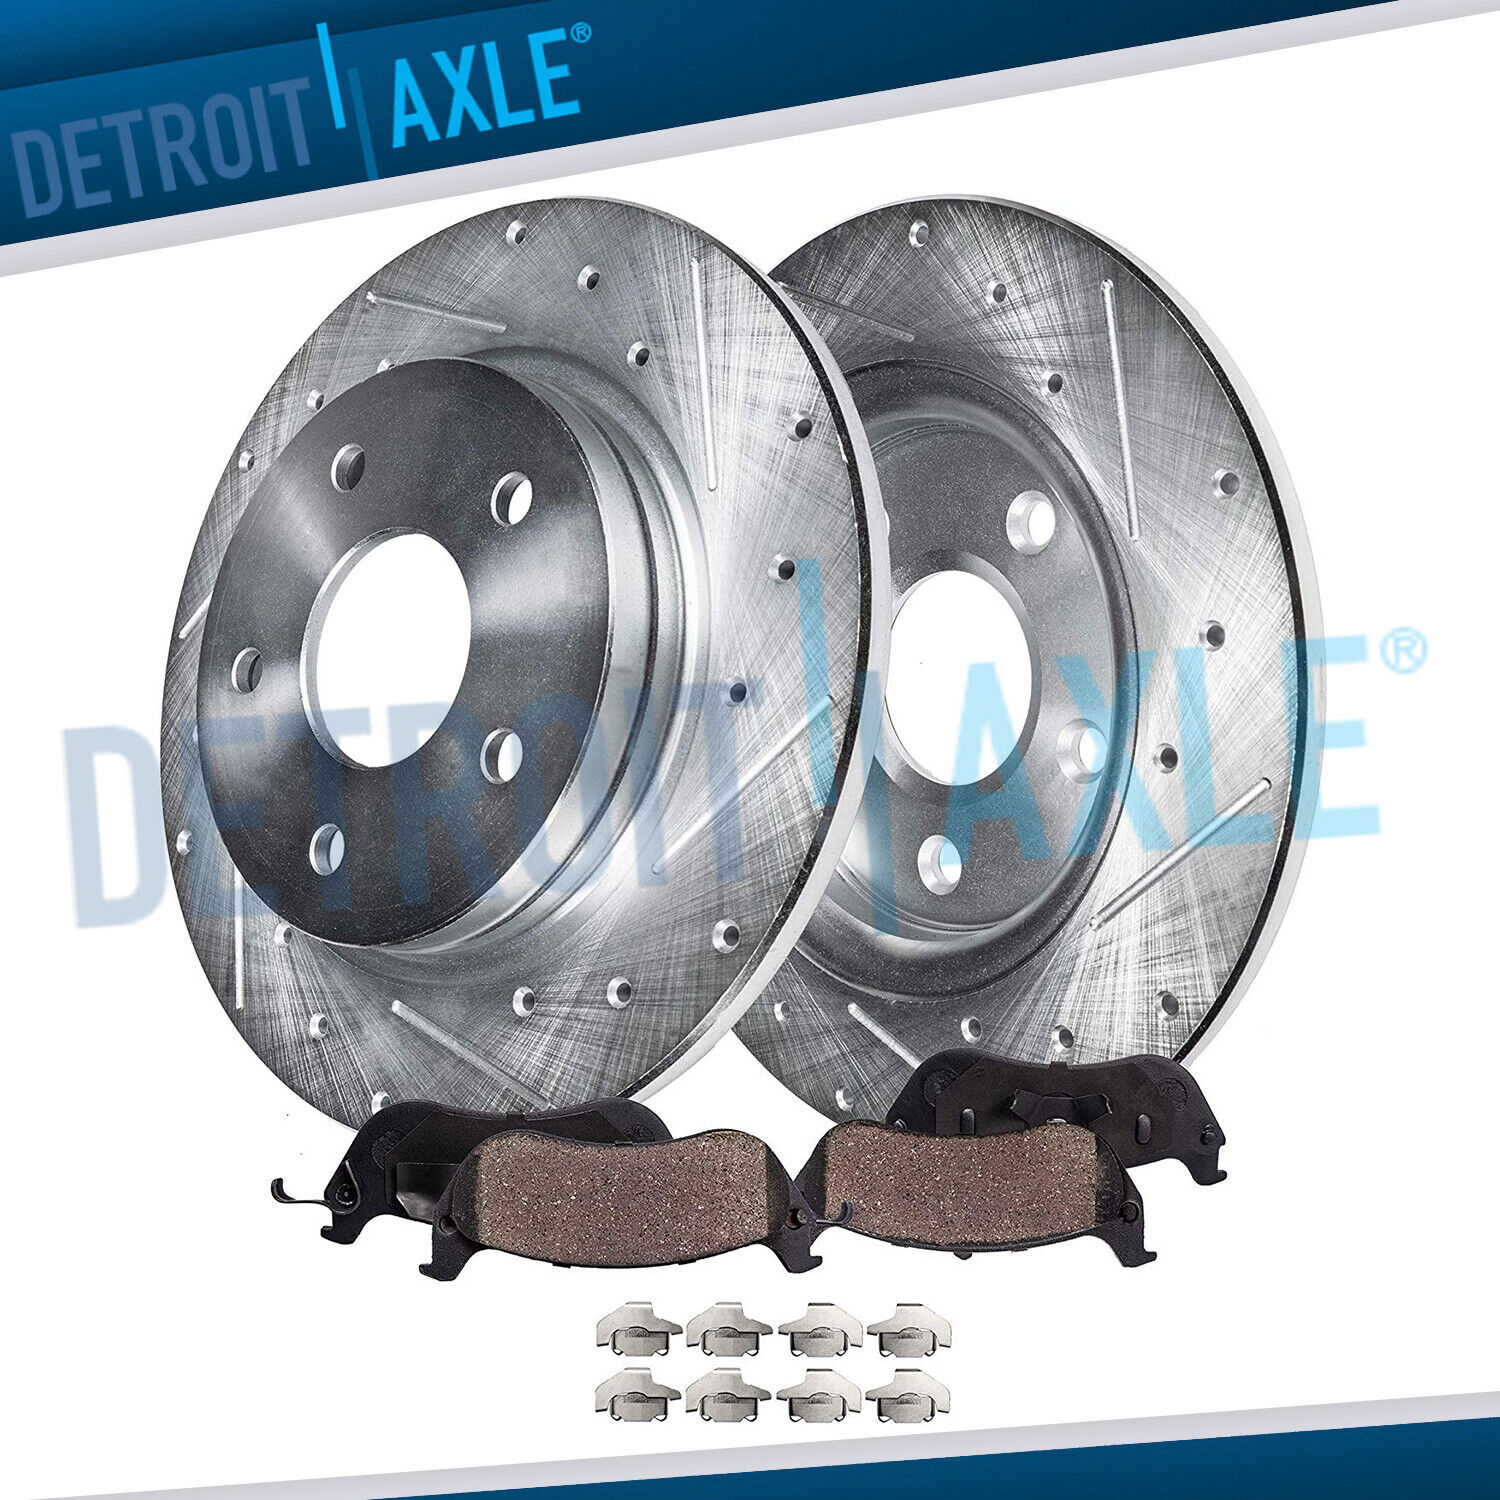 Rear Drilled Rotor Brake Pads for 2005 - 2008 Grand Prix Buick Allure Lacrosse